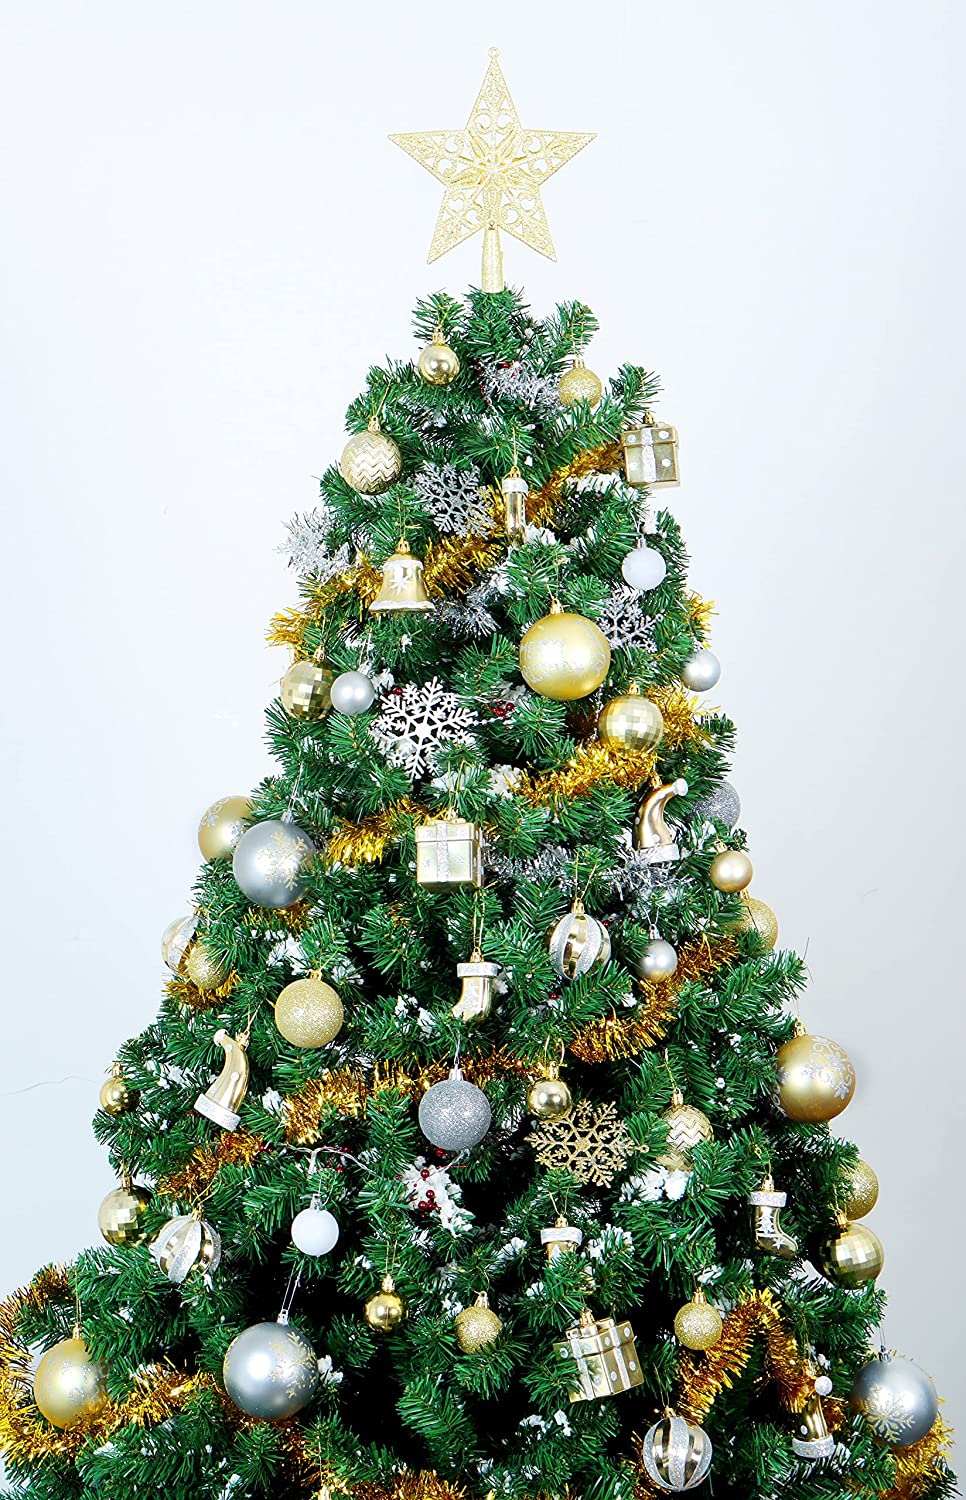 112 Pcs Gold & Silver Christmas Assorted Ornaments with a Star Tree Topper